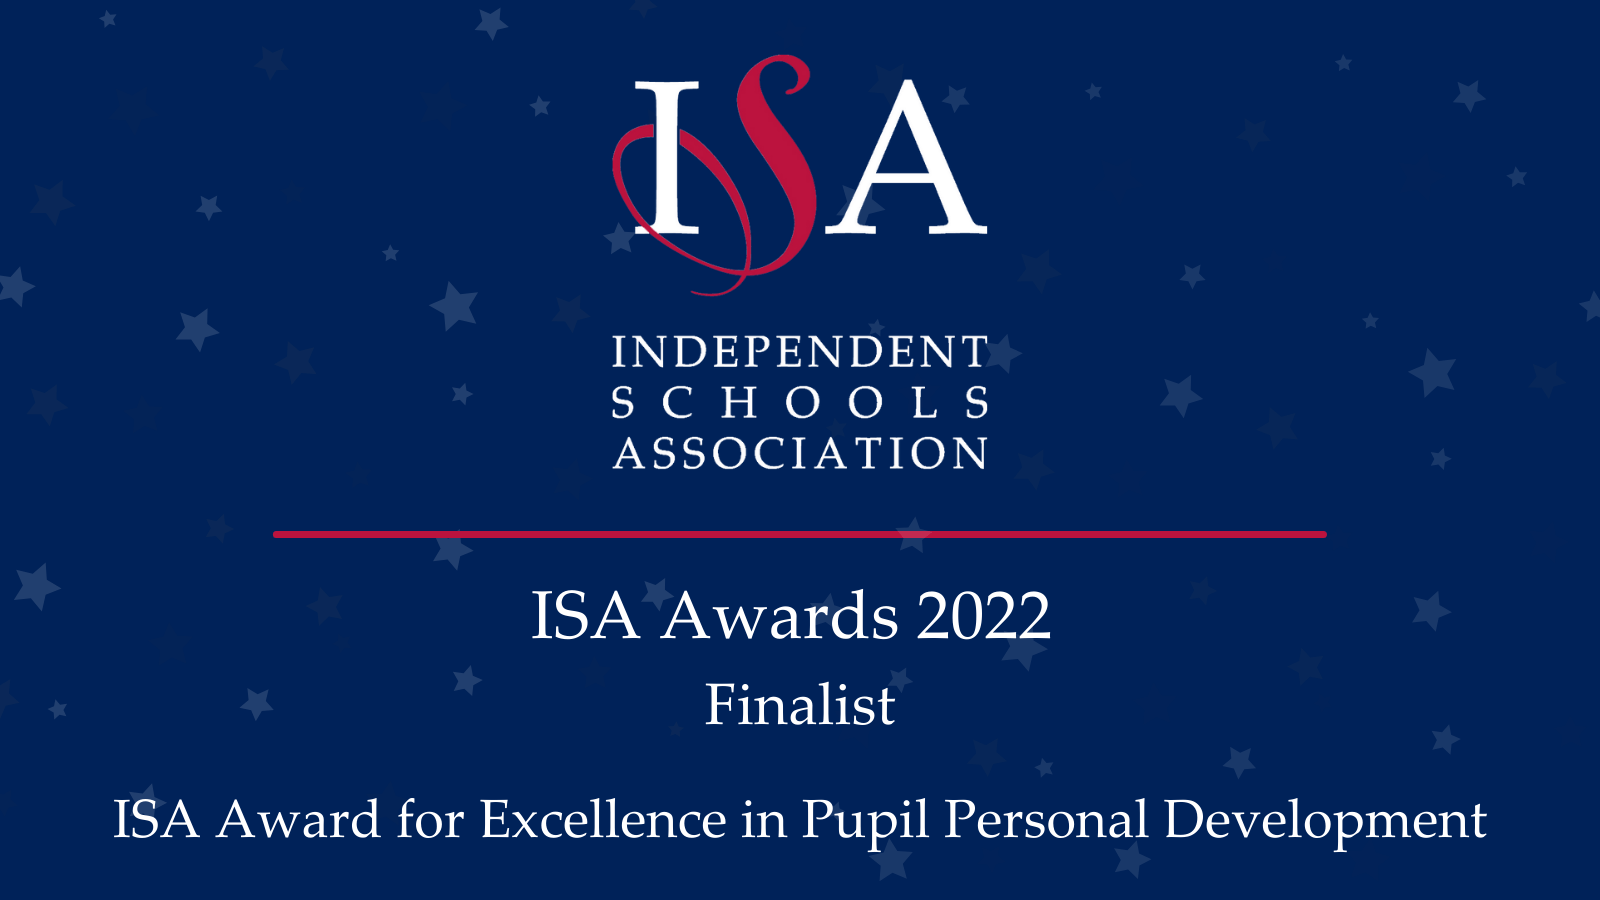 ISA Awards 2022 Finalist-isa-awards-2022-finalist-ISA-Award-for-Excellence-in-Pupil-Personal-Development